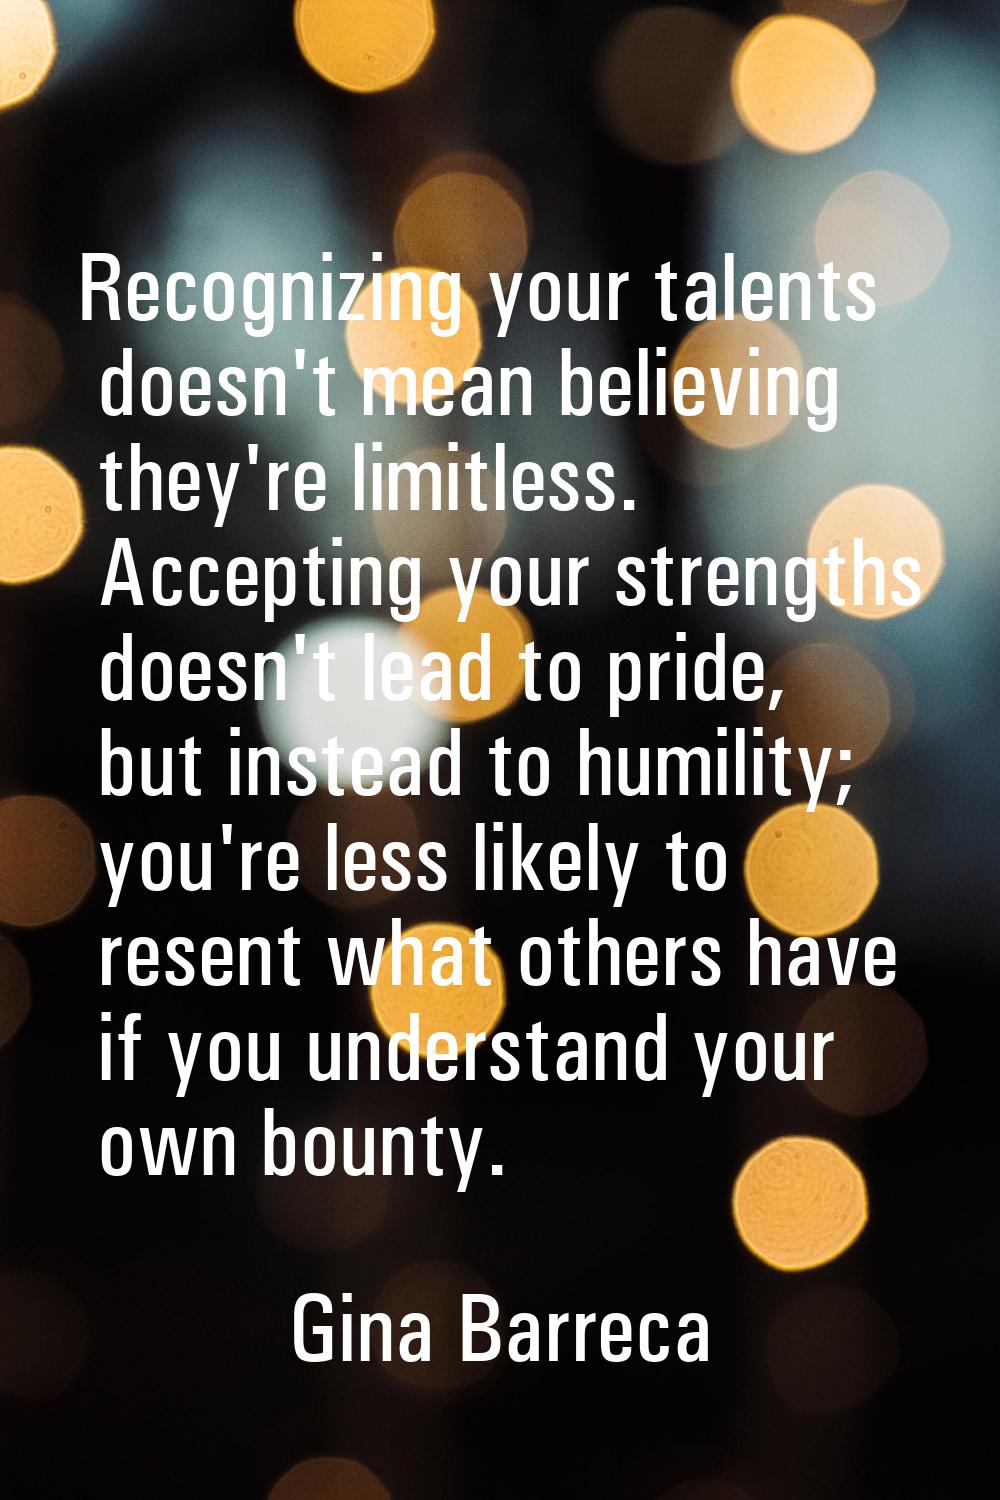 Recognizing your talents doesn't mean believing they're limitless. Accepting your strengths doesn't